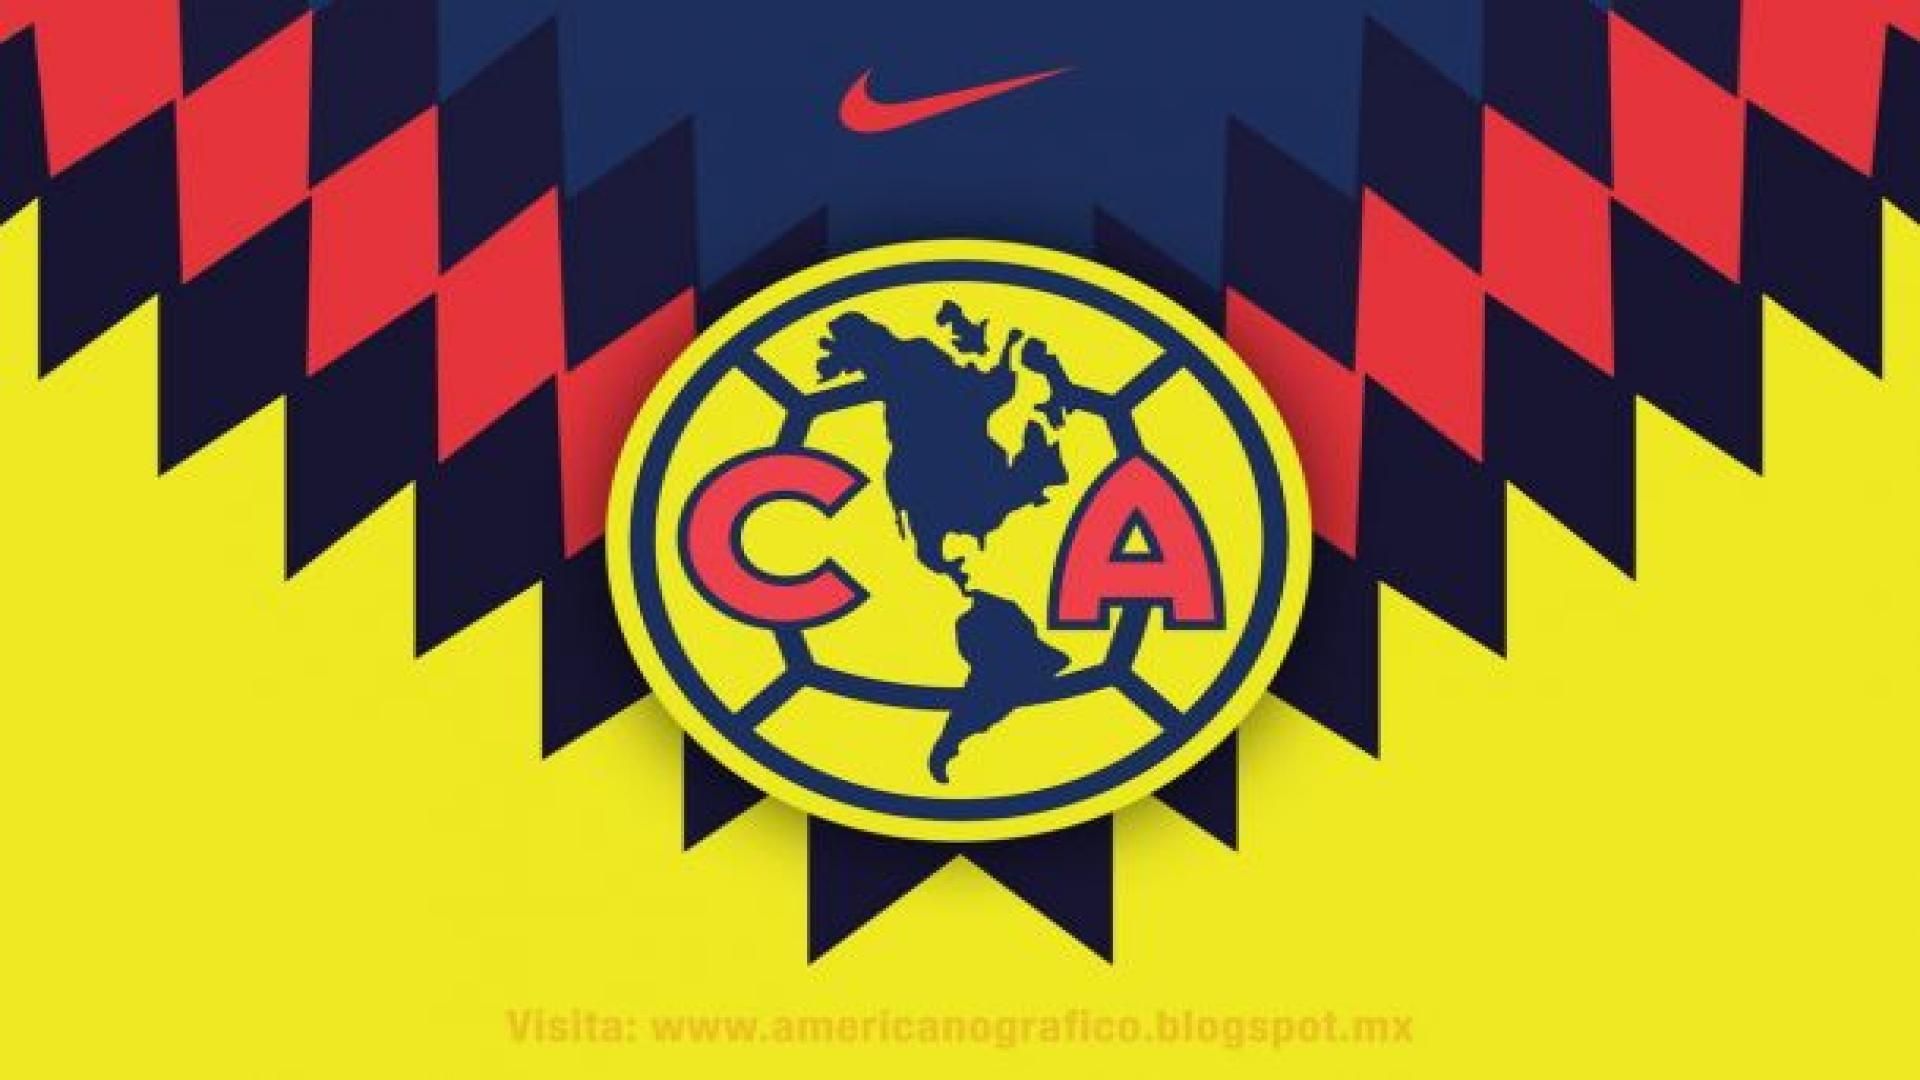 Get Free High Quality Hd Wallpapers Club America Logo  Independiente  Transparent PNG  1024x683  Free Download on NicePNG